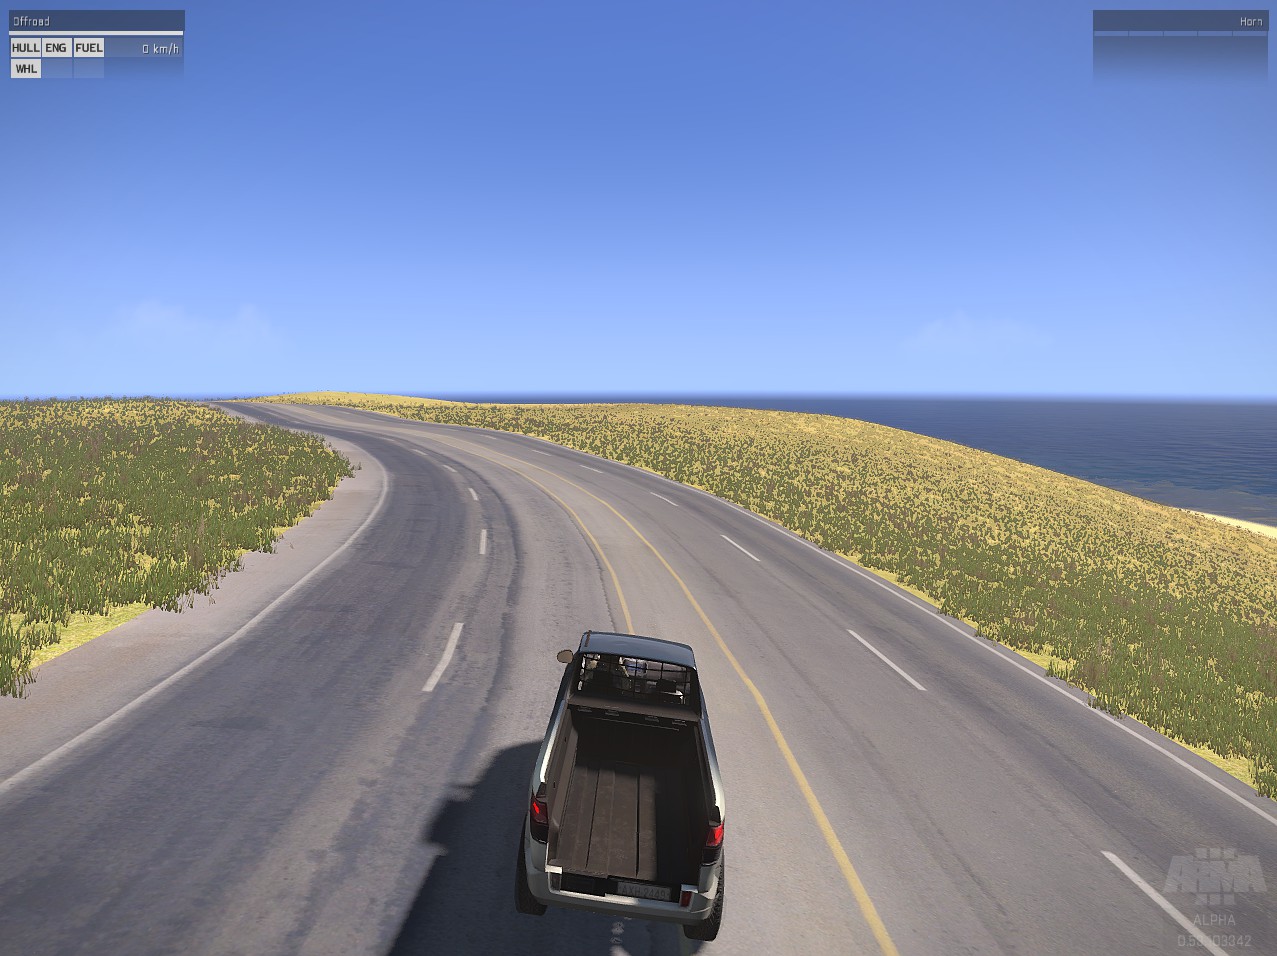 pmc.editing.wiki_images_arma-3-road-shape-file-making-guide-02.jpg